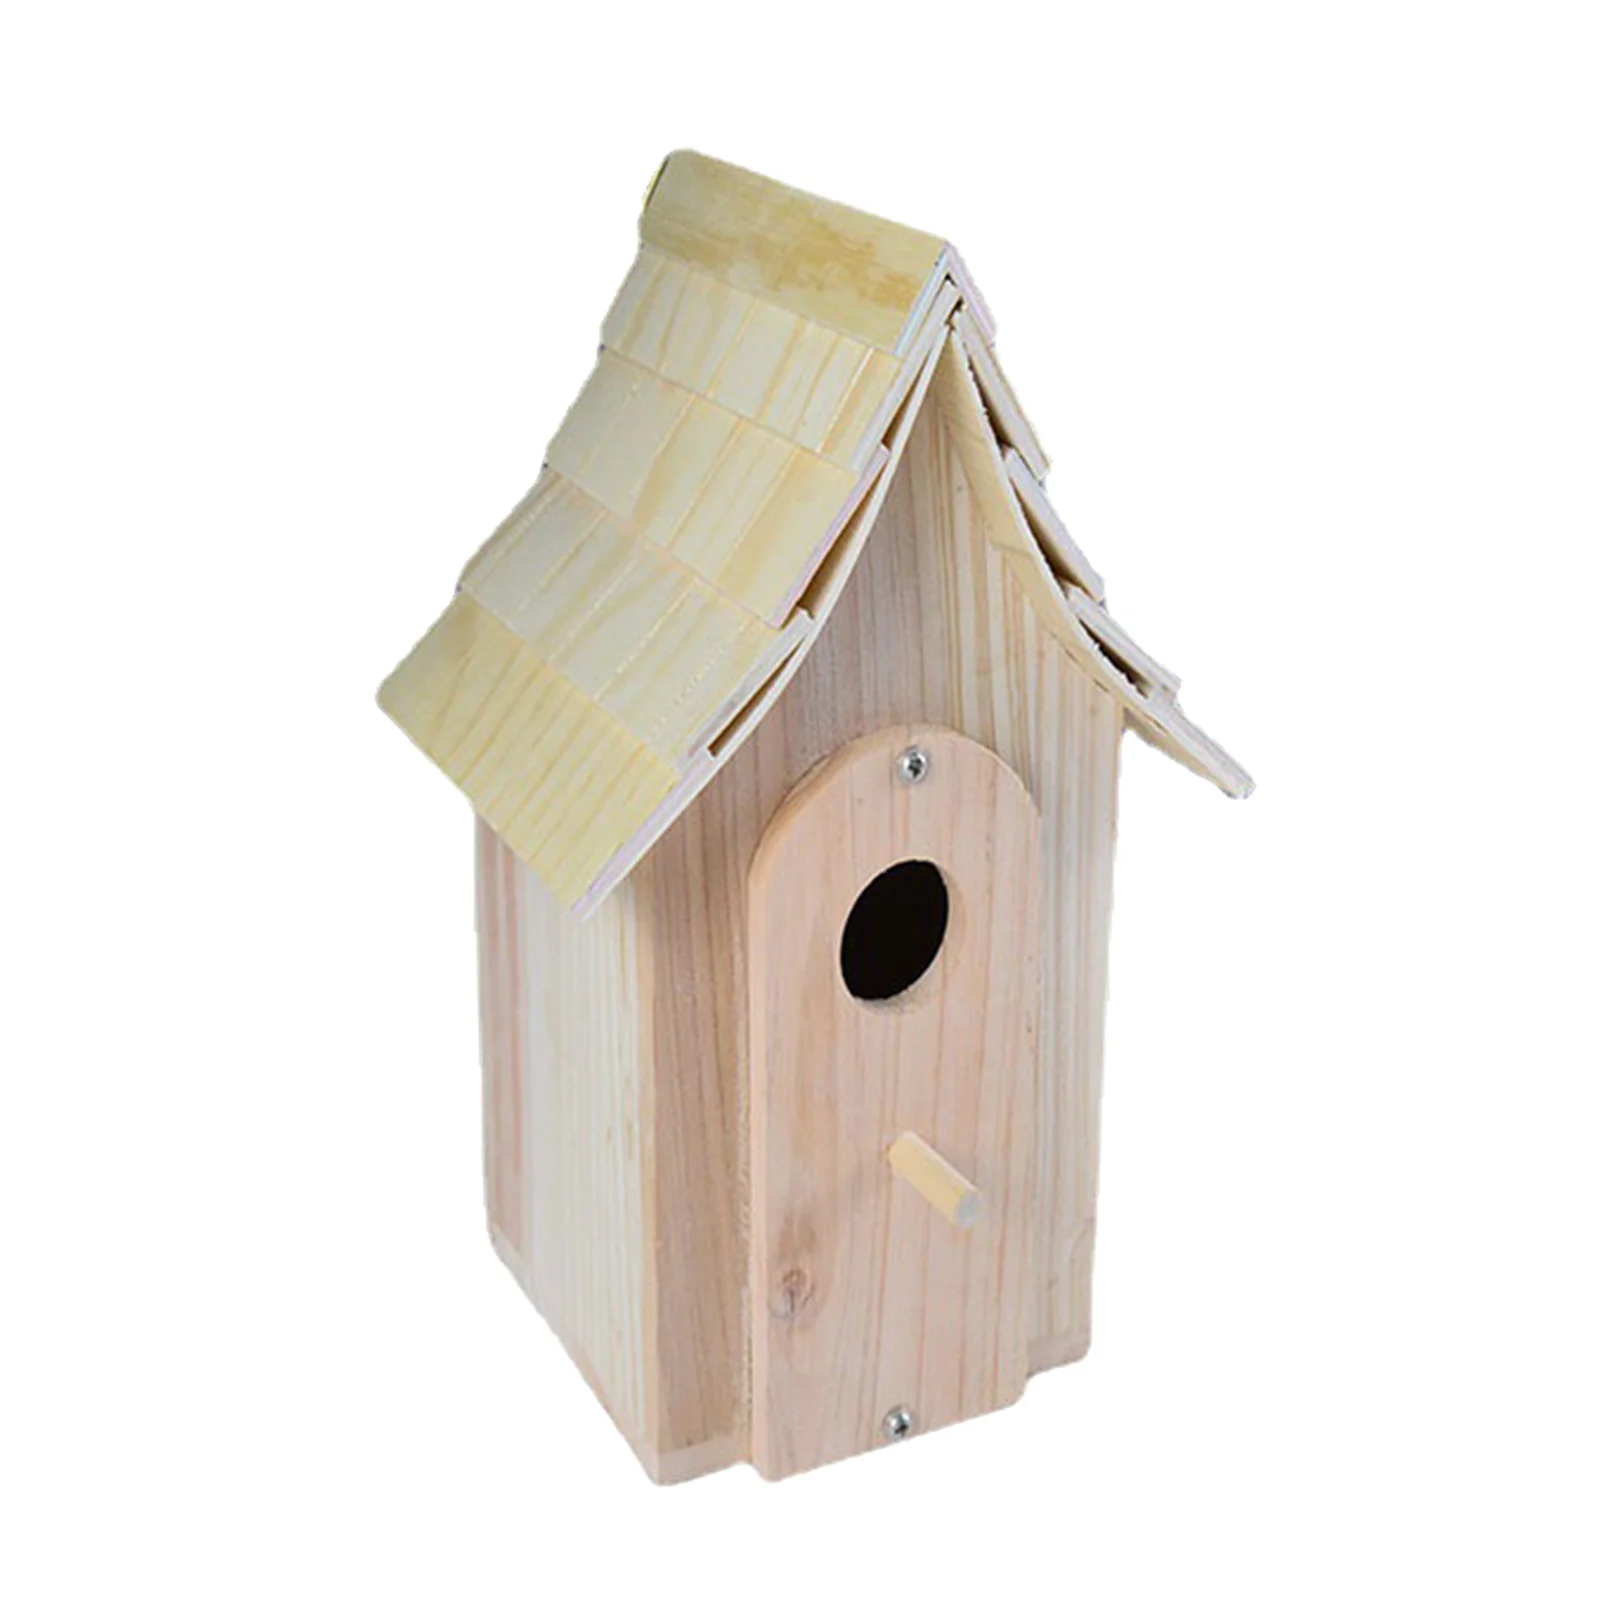 Outdoor Bird House Hanging Novel in Shape Small Wooden Stick Resting Place